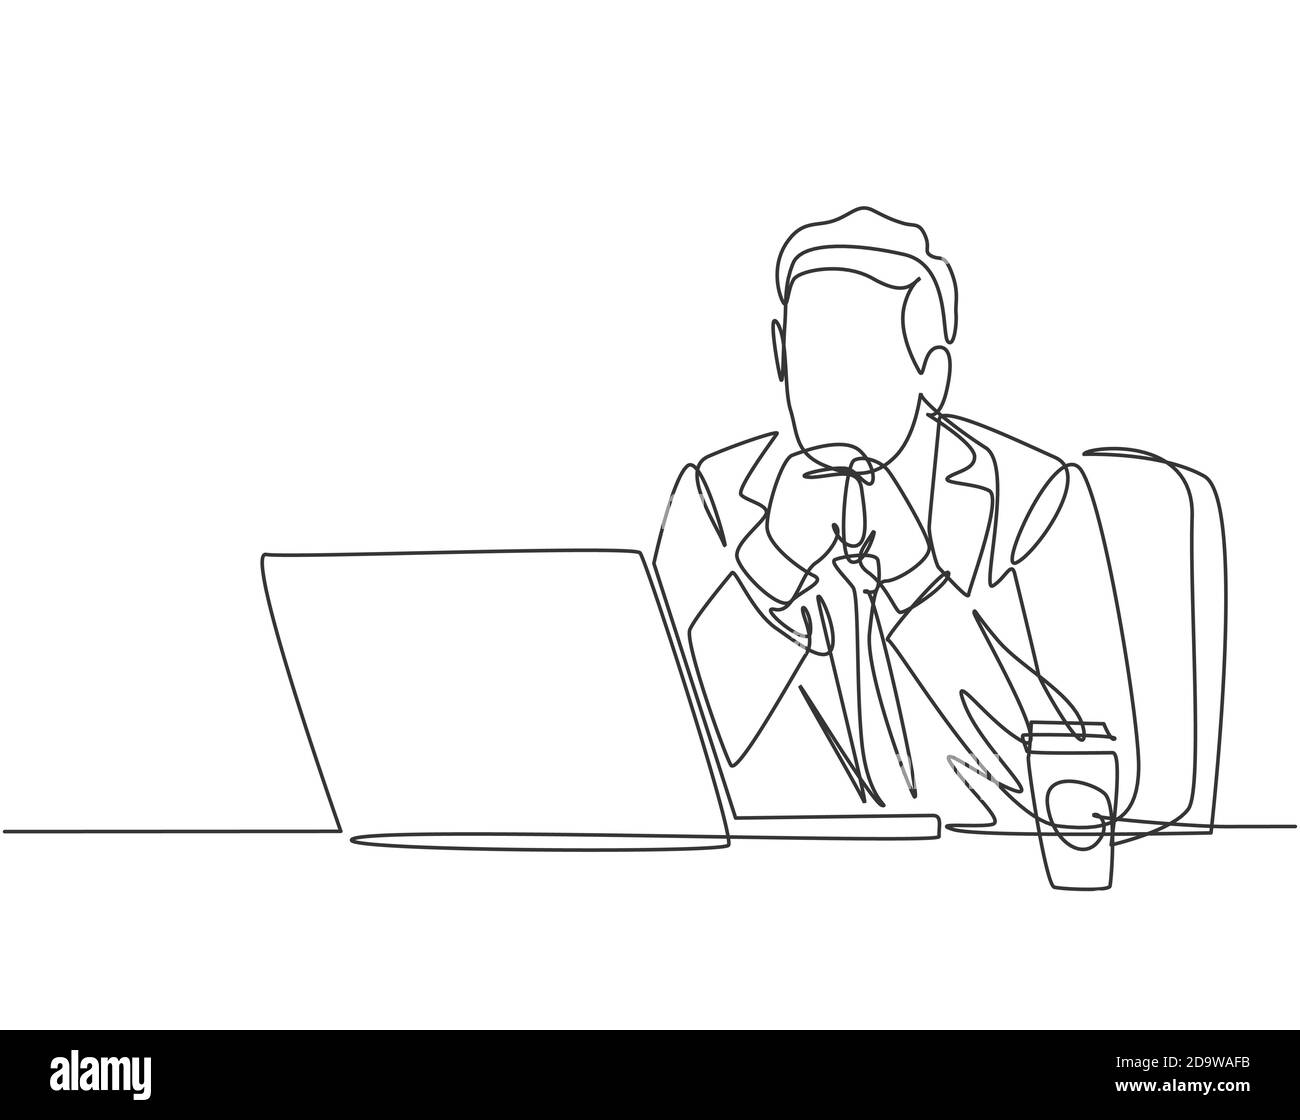 Single continuous line drawing of young male worker sitting and thinking seriously in front of computer screen at the office. Work focus concept Stock Vector